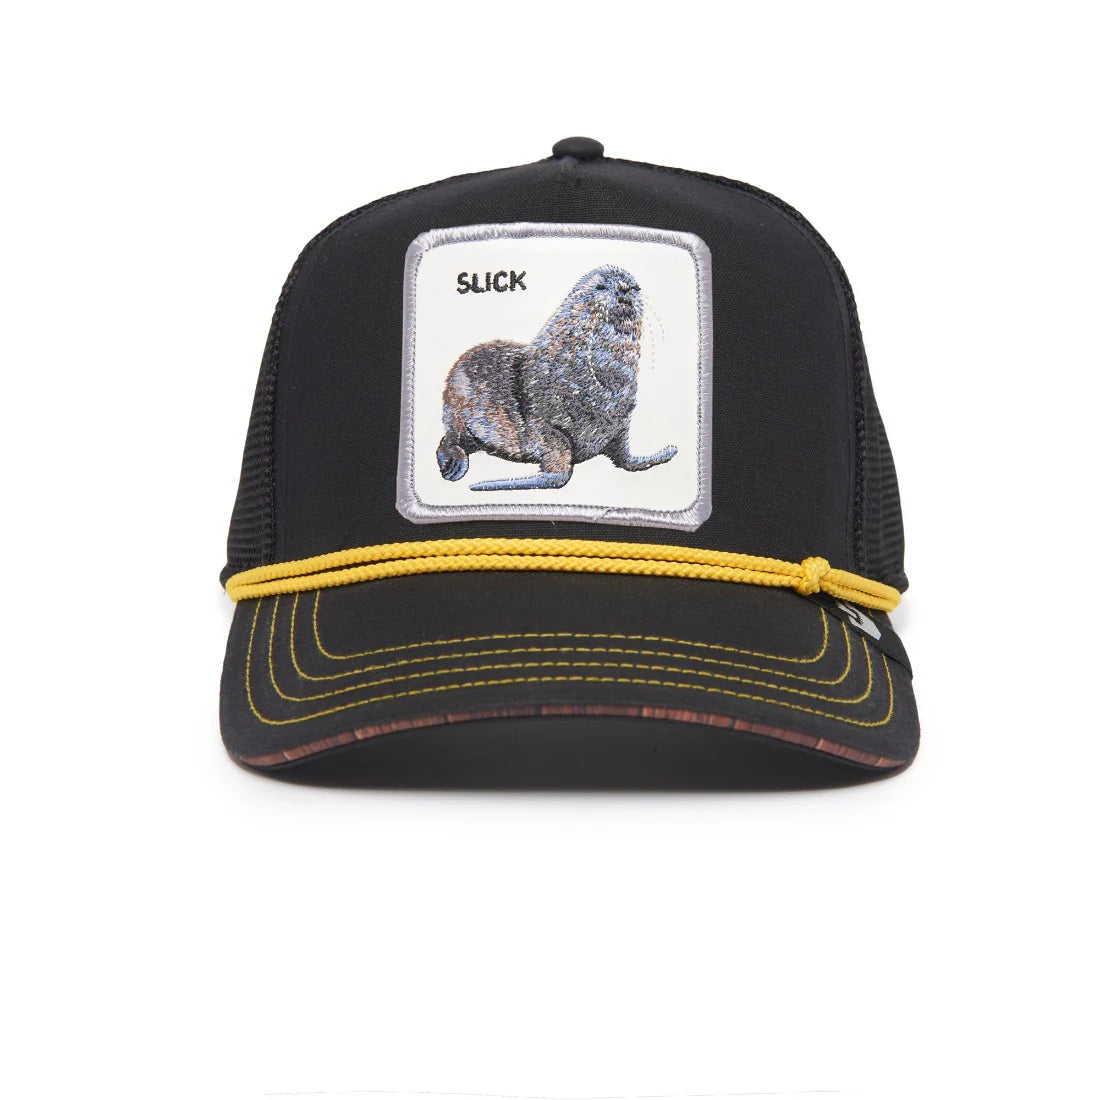 'Goorin Bros. Seal of Approval Trucker Hat' in 'Black' colour